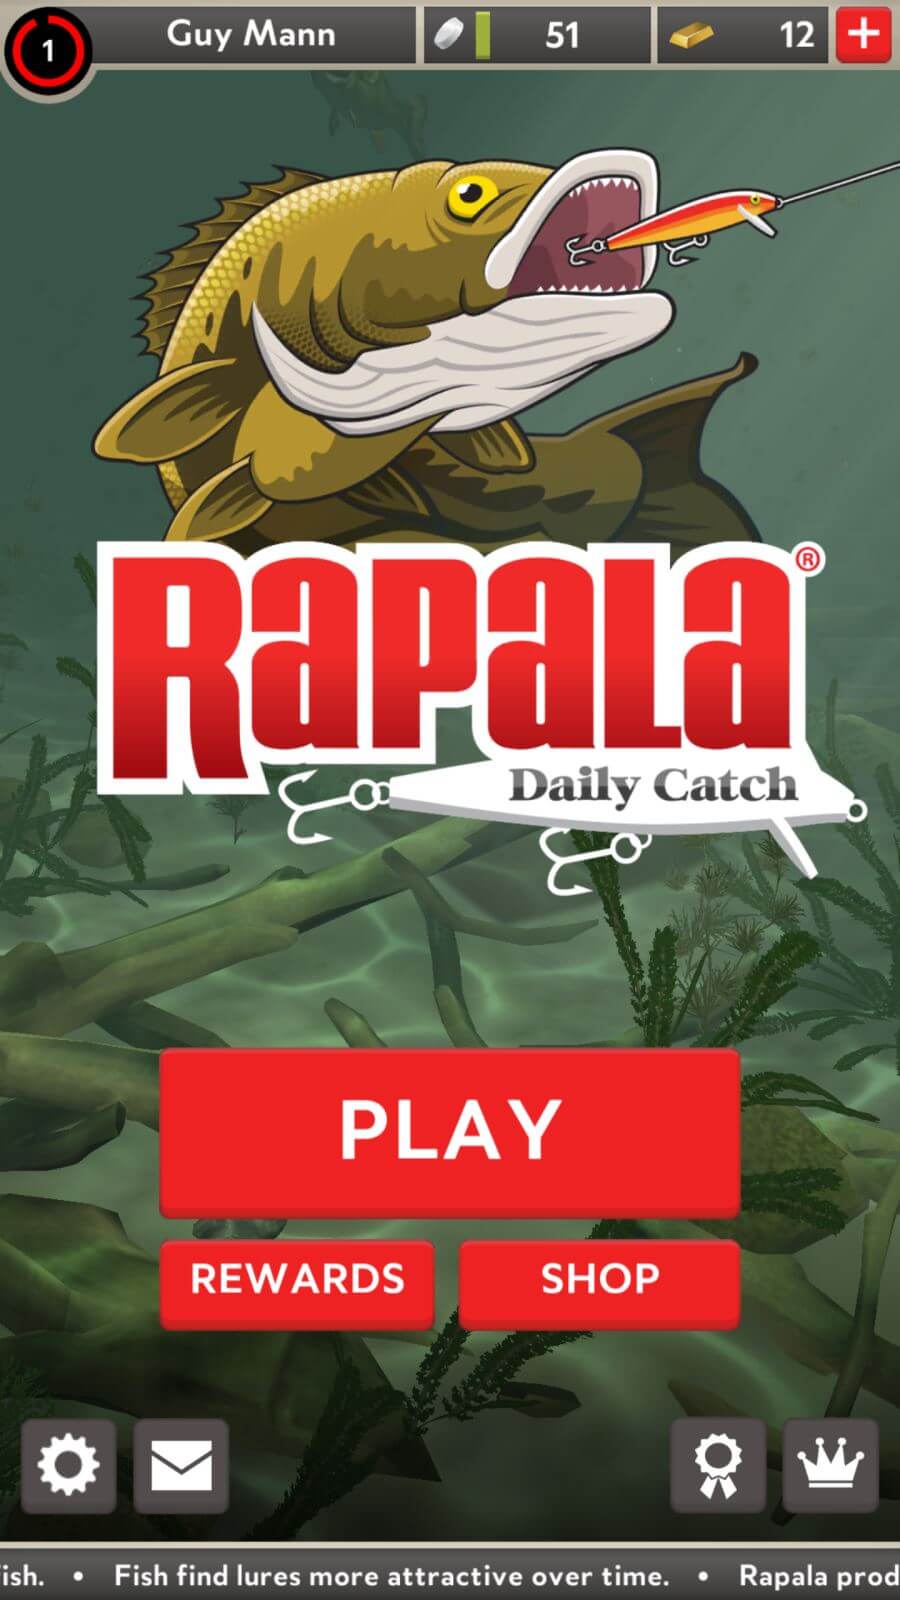 Your Fishing Fill With Rapala Daily Catch